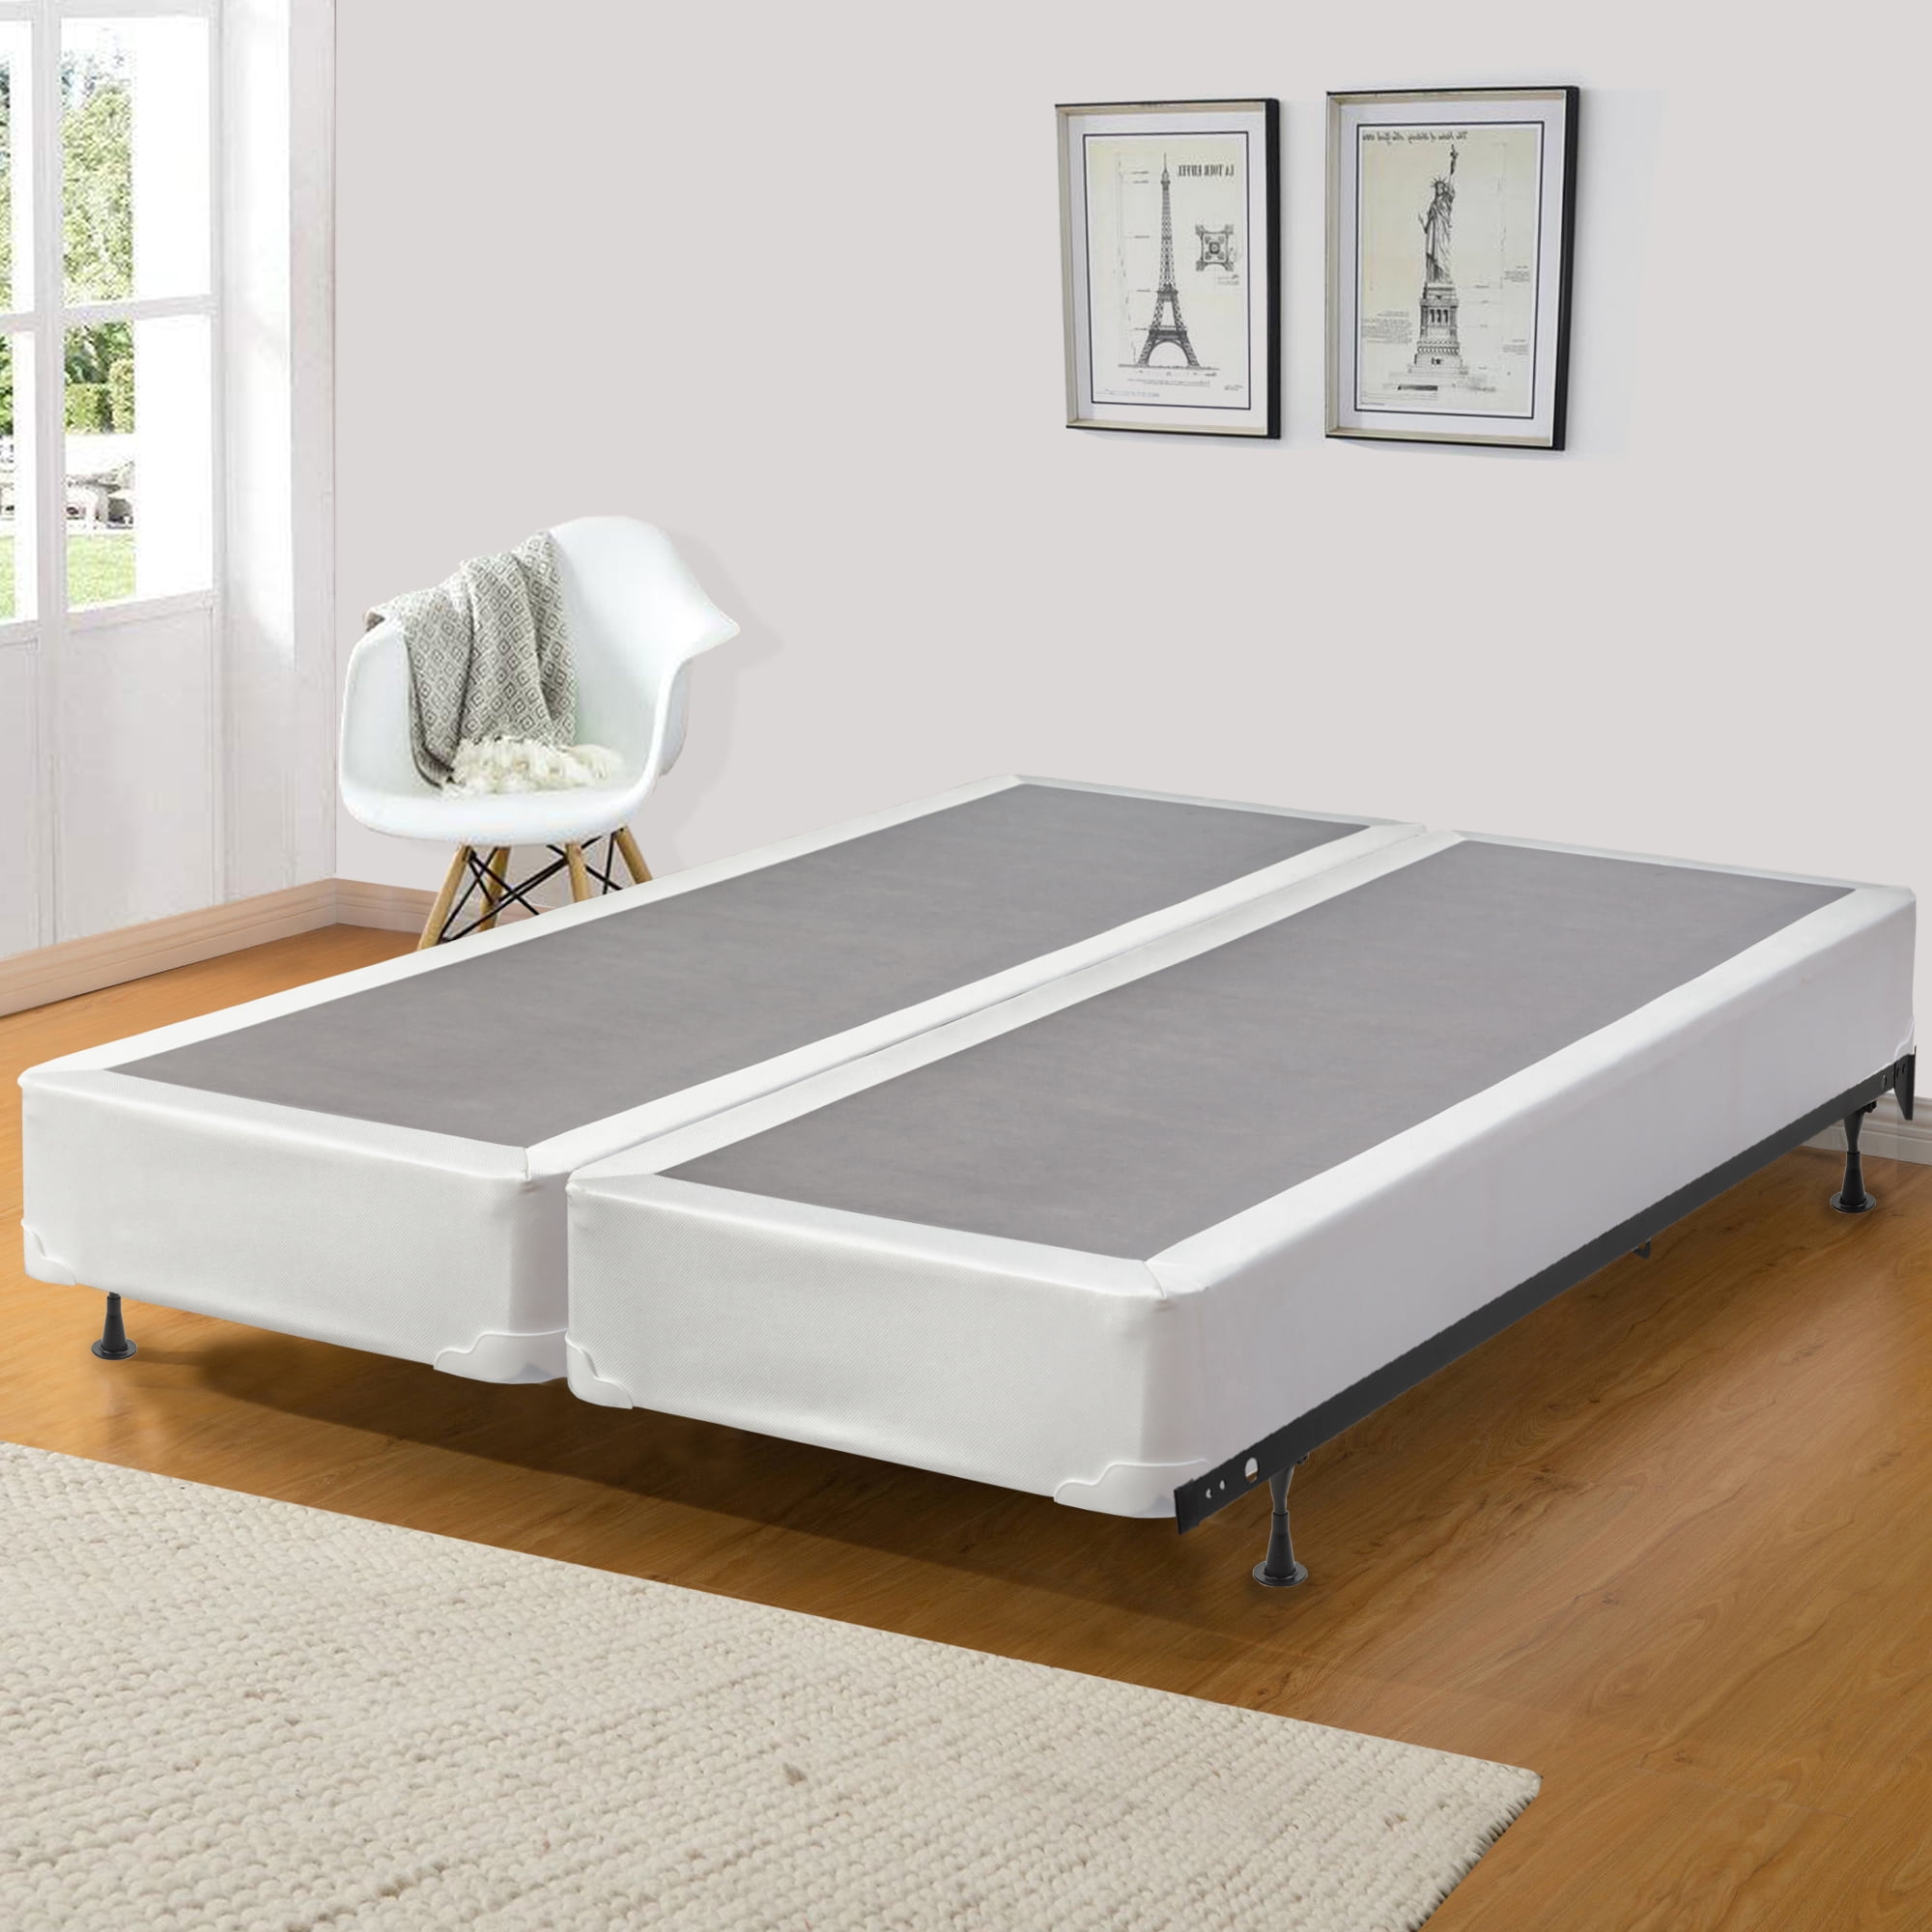 Details about   Box Spring 5" Durable Steel for Memory Foam Mattresses Twin Full Queen King Size 